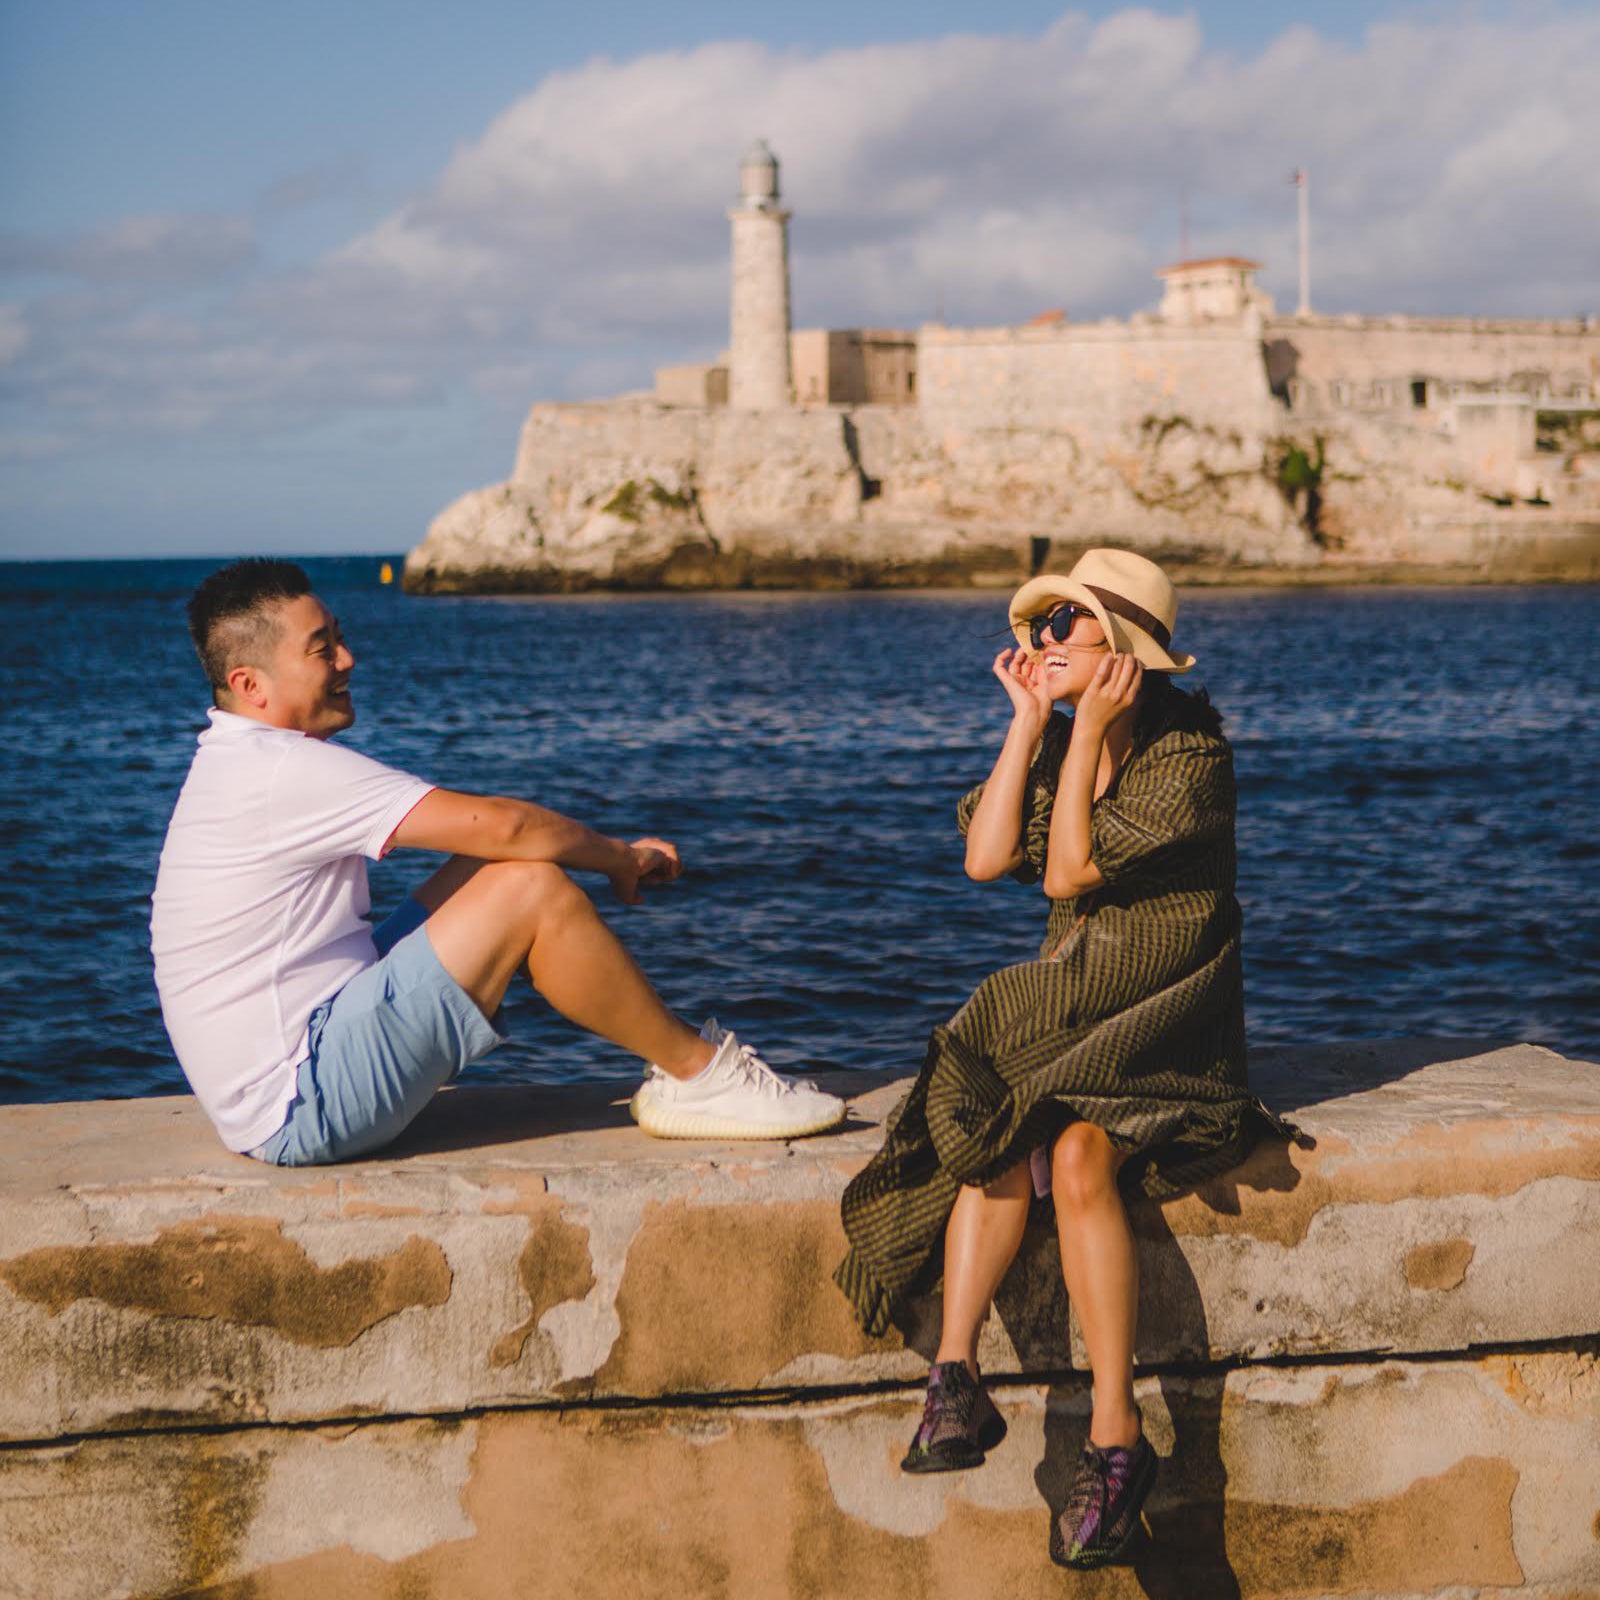 Gardner Tours Cuba Tours Havana Long Weekend Tour 5 Star TripAdvisor Review by Harim and Stephanie Kim who are sitting on the malecon across from the El Morro Castle